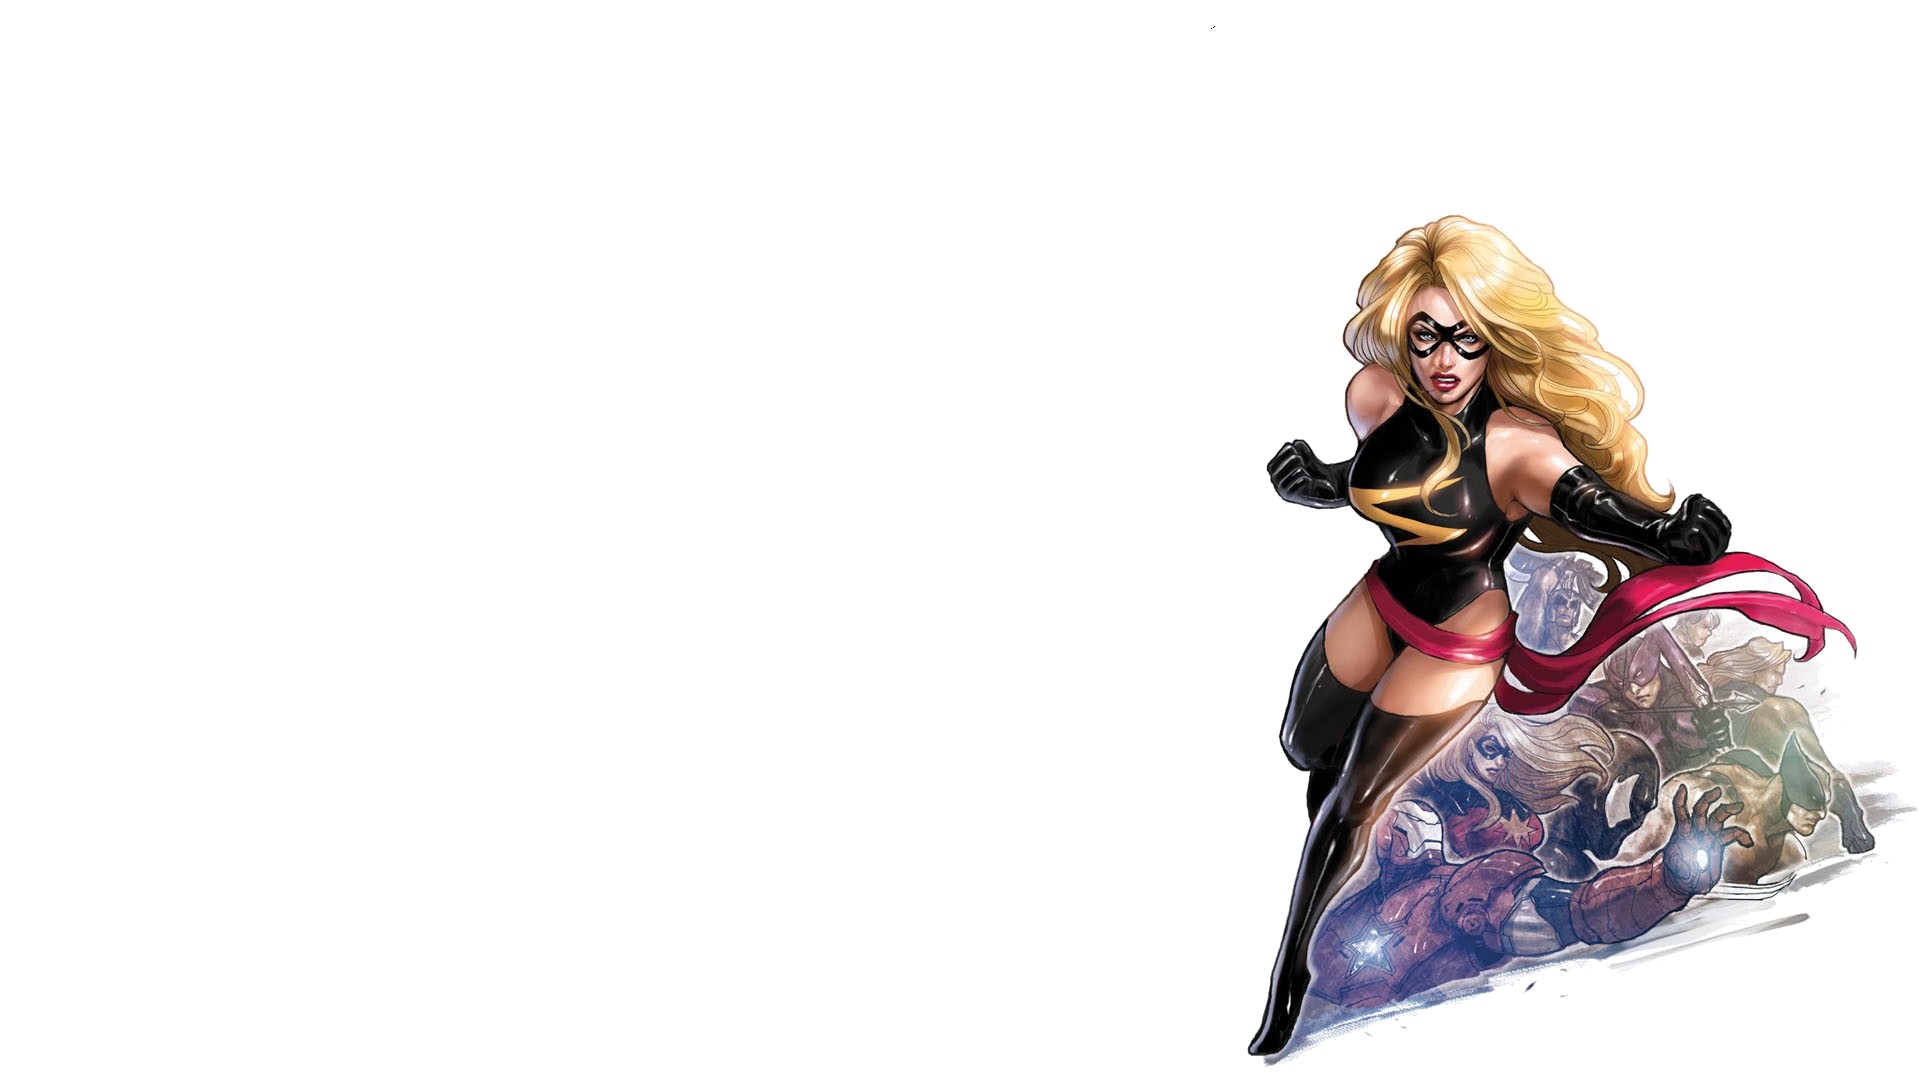 1920x1080 HQ Background Pictures Â· Ms Marvel Pictures Pack Download 4 Free Ver.82 ...